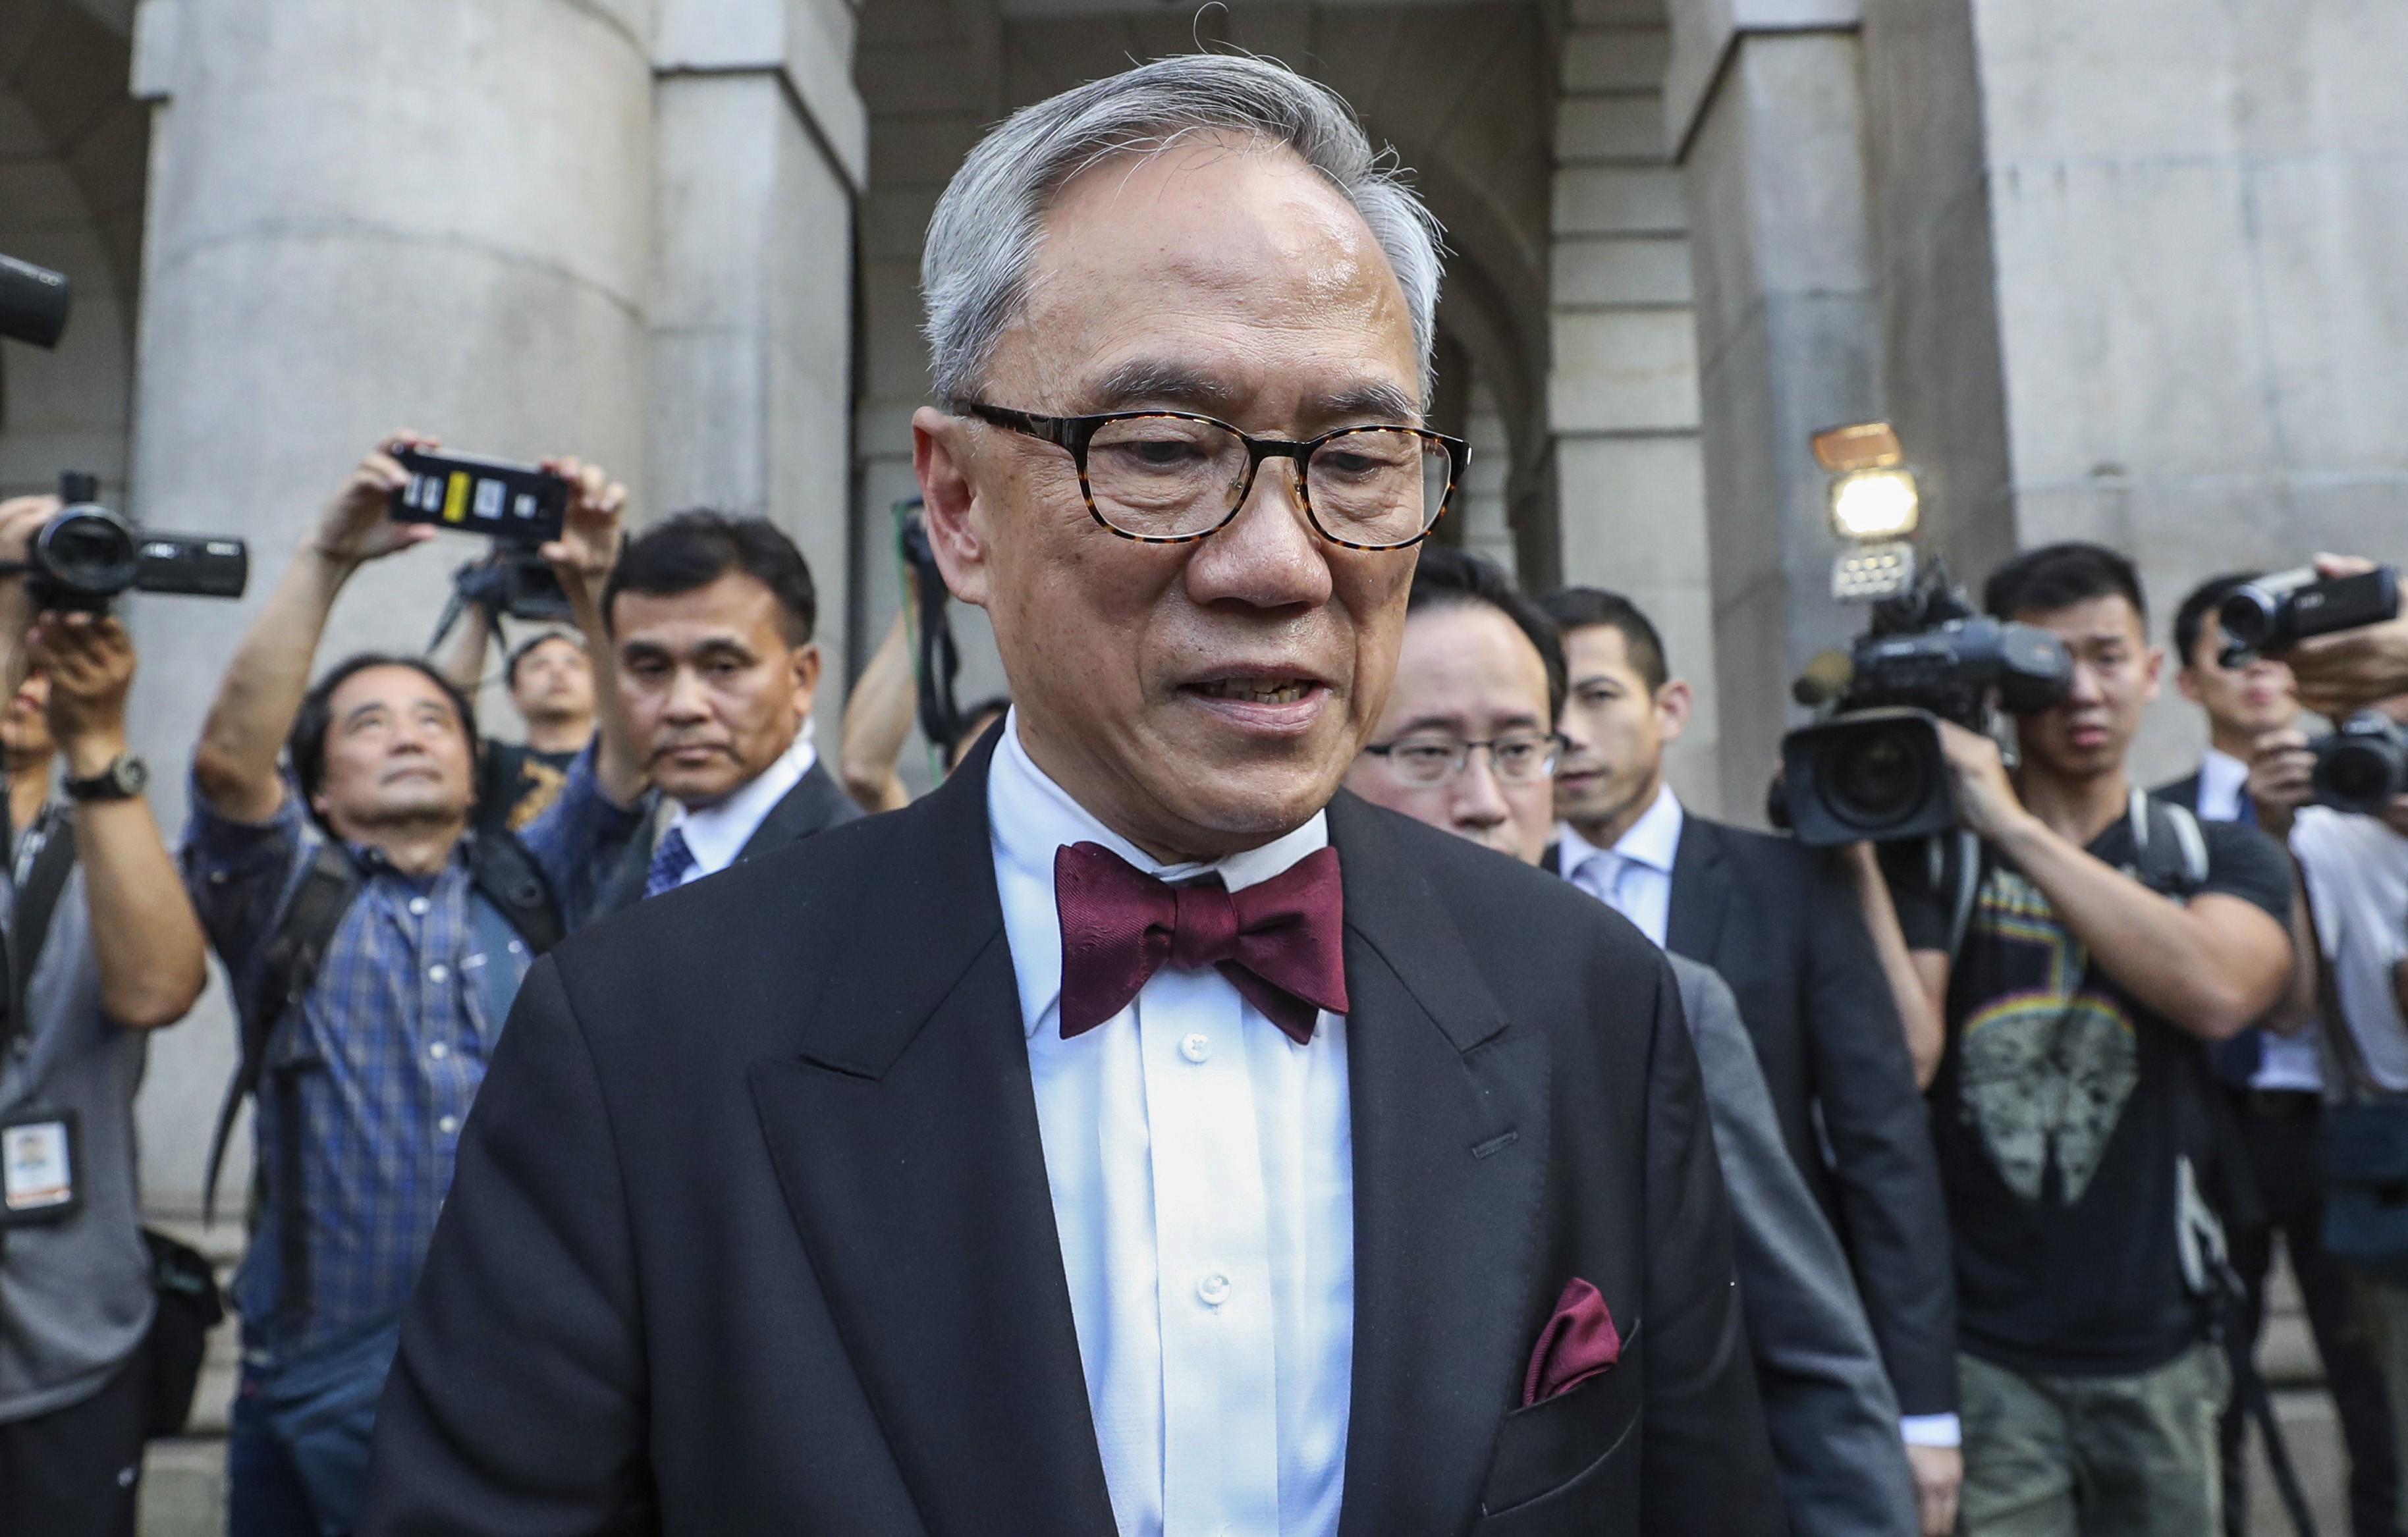 Donald Tsang leaves the Court of Final Appeal in Central last month, where judges heard closing arguments. The ruling on his 2017 conviction will be made this week. Photo: Winson Wong